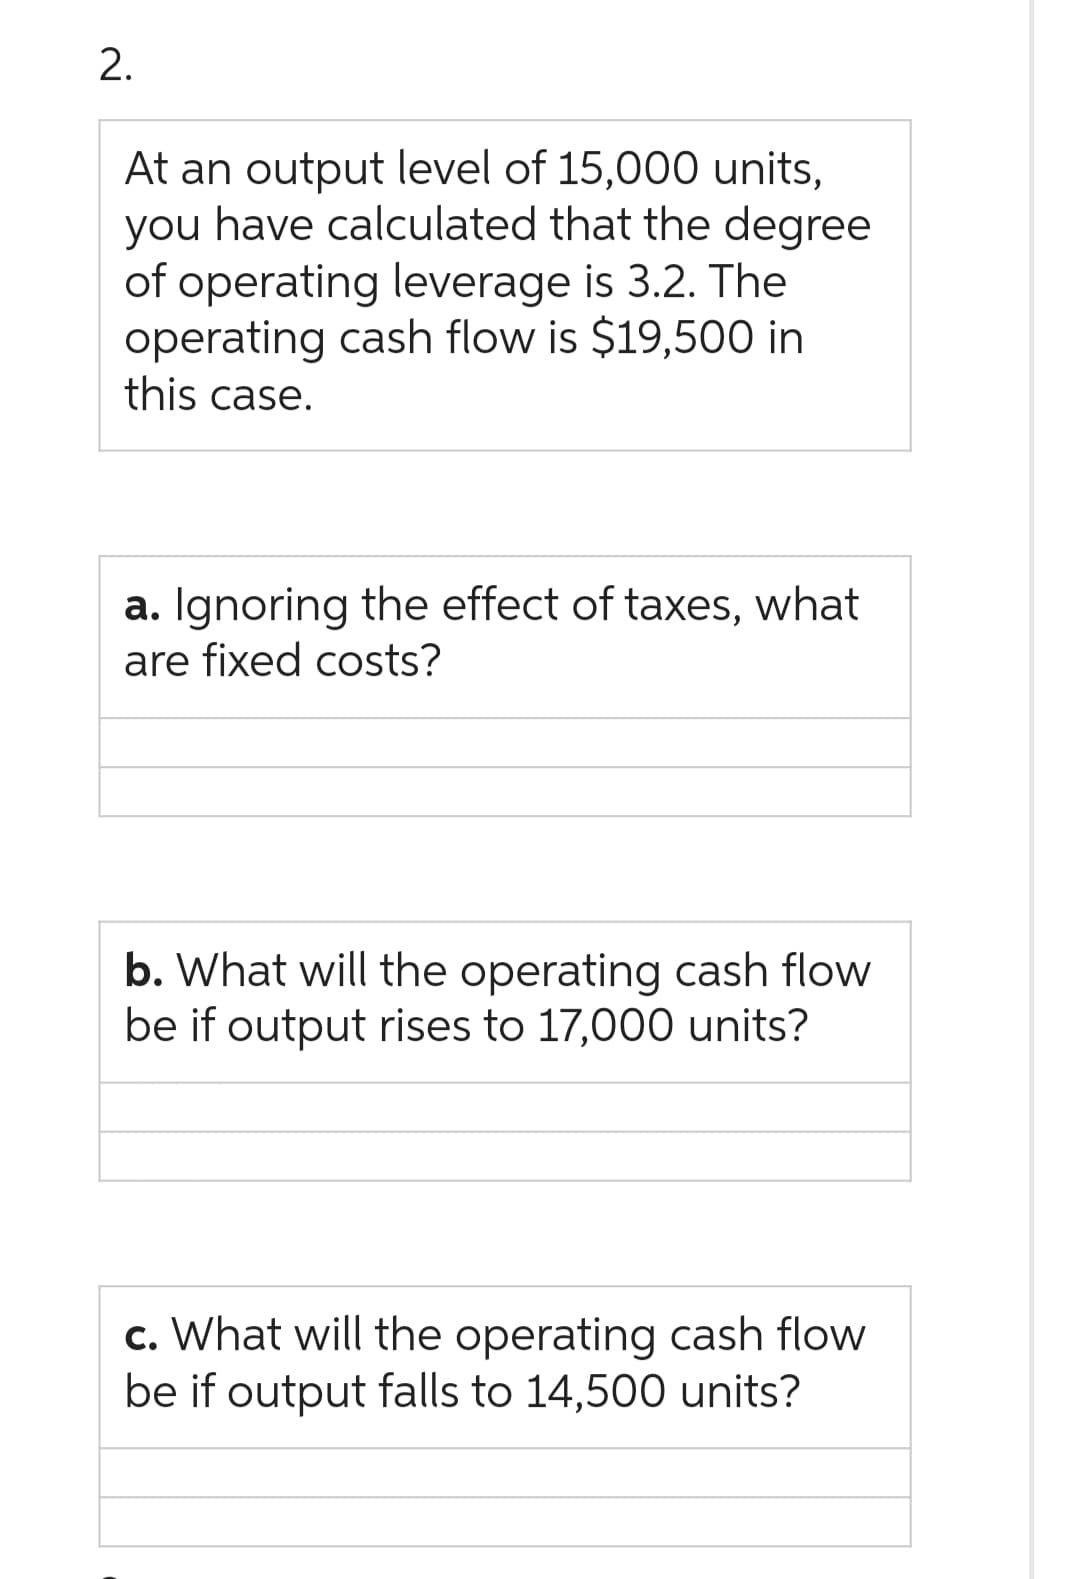 2.
At an output level of 15,000 units,
you have calculated that the degree
of operating leverage is 3.2. The
operating cash flow is $19,500 in
this case.
a. Ignoring the effect of taxes, what
are fixed costs?
b. What will the operating cash flow
be if output rises to 17,000 units?
c. What will the operating cash flow
be if output falls to 14,500 units?